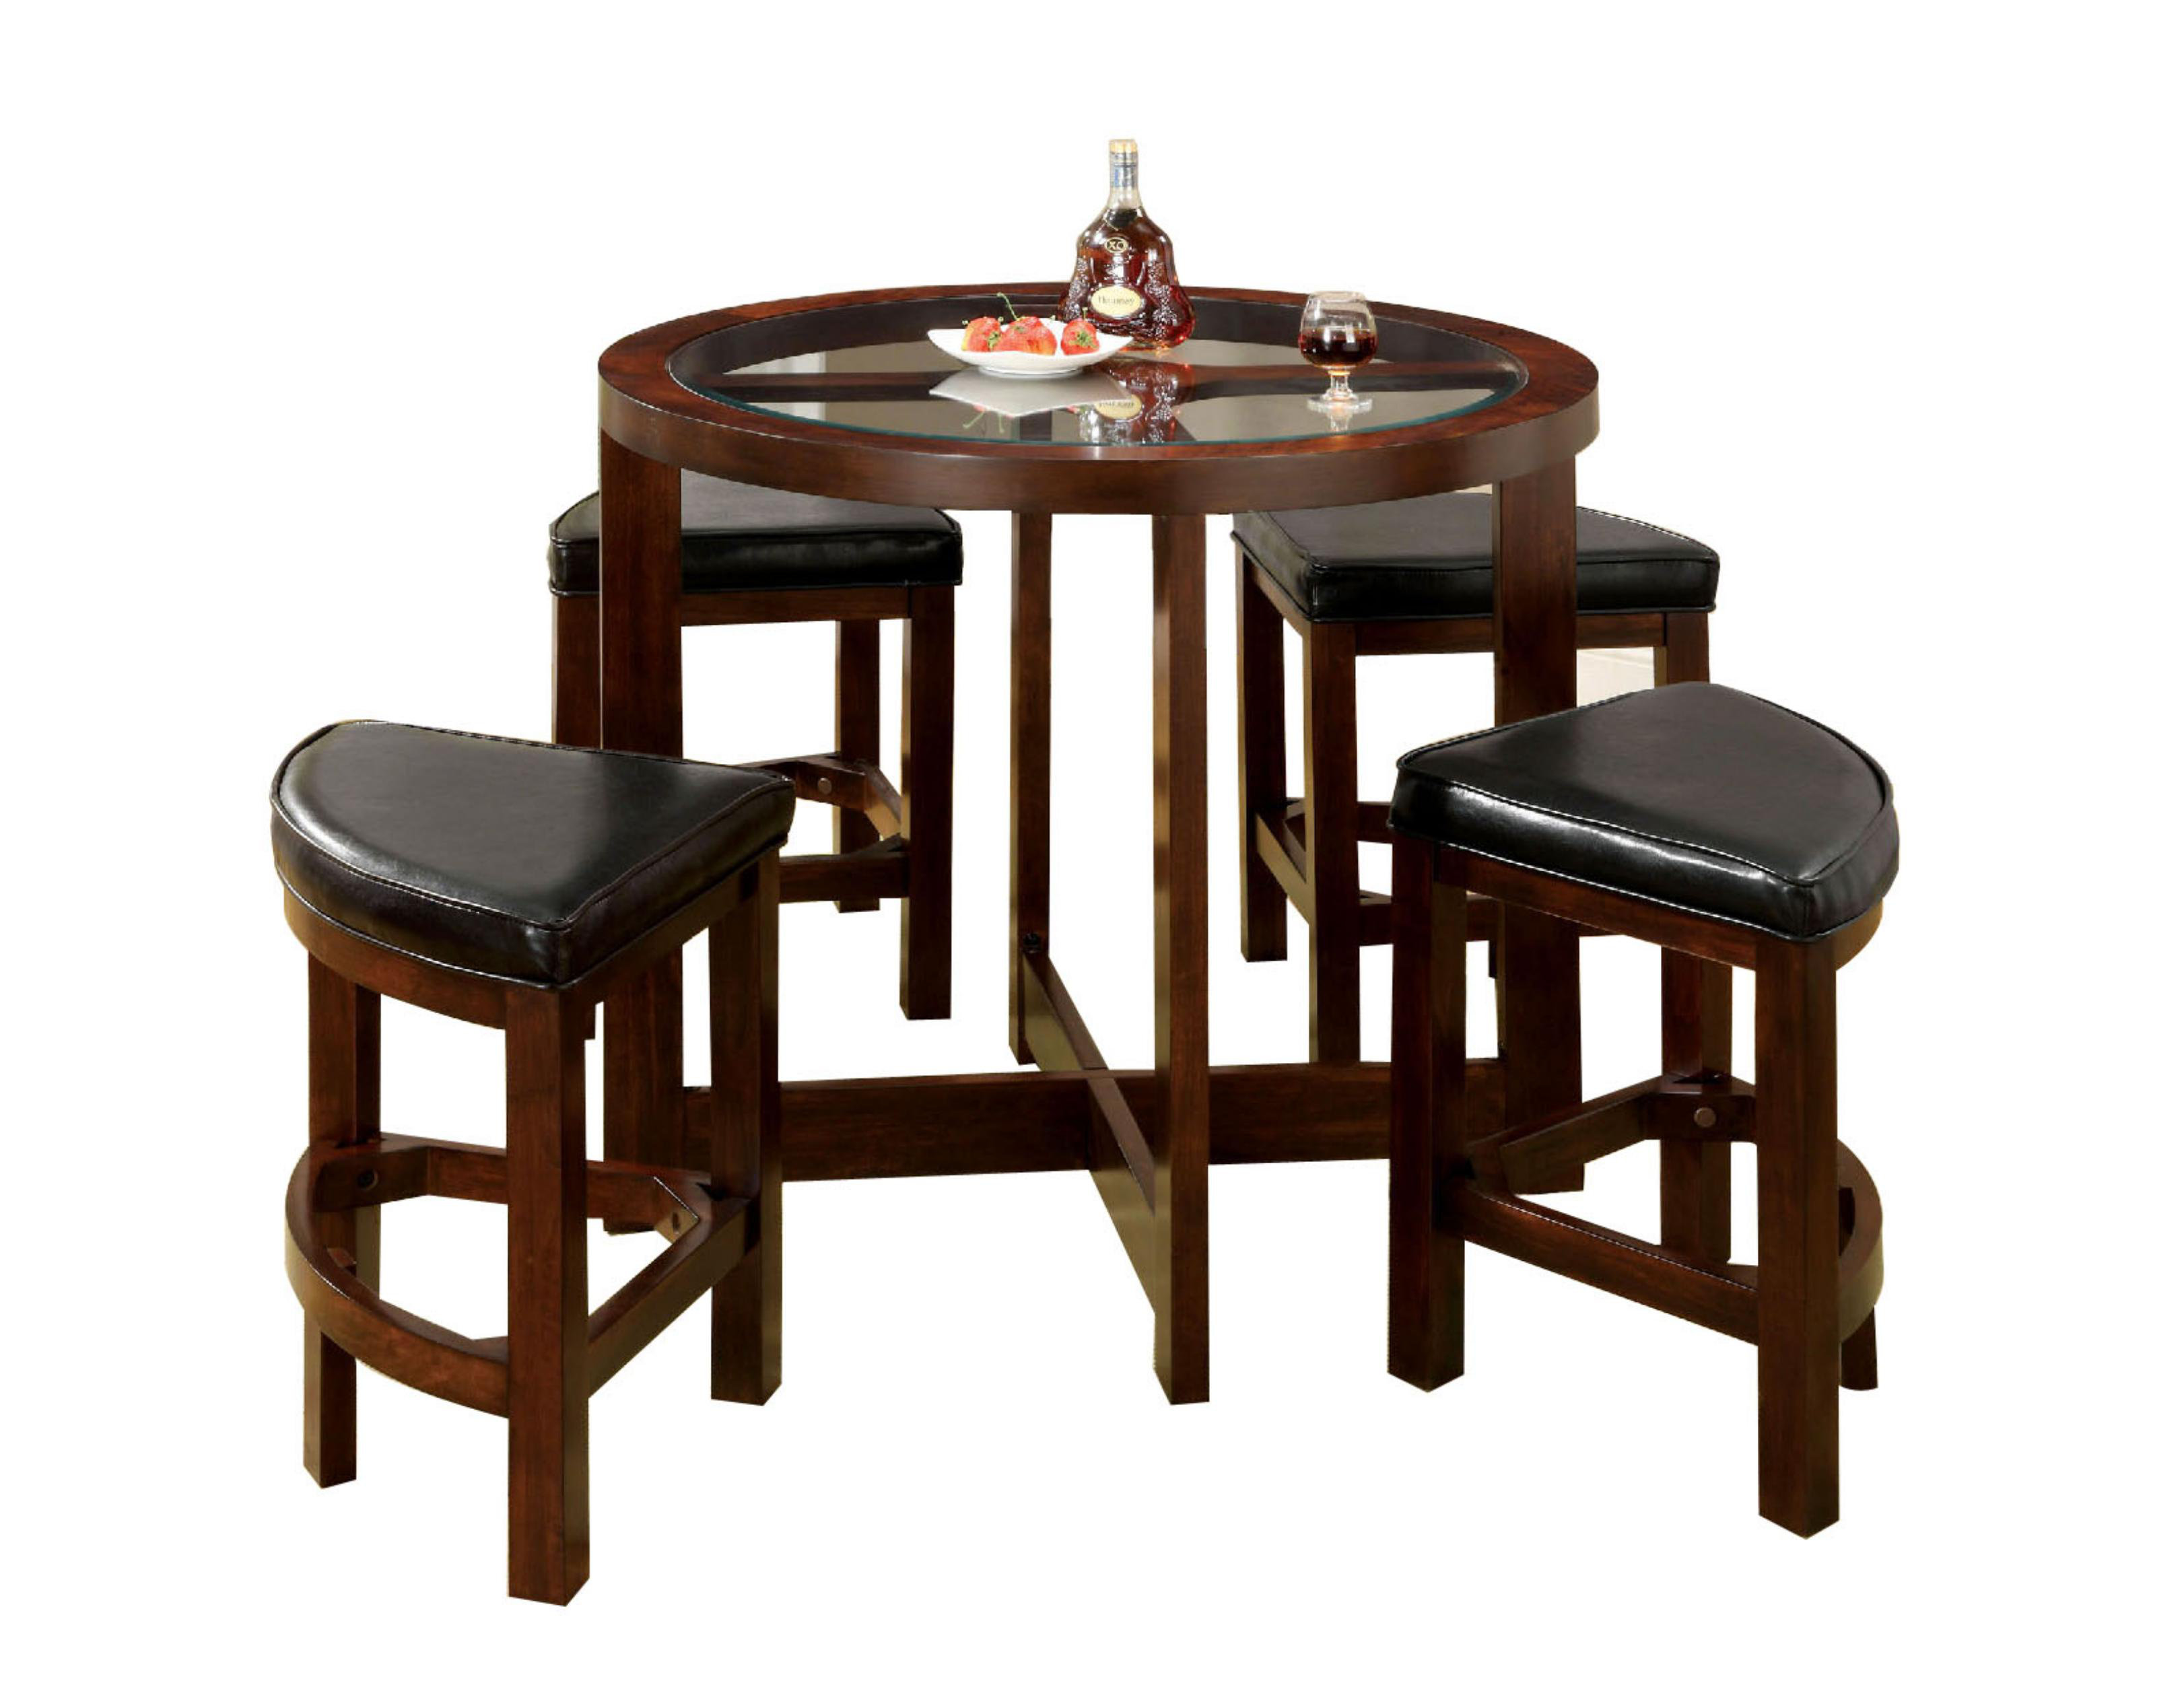 Darby Home Co Fellman 5 Piece Counter Height Dining Table Set Reviews Wayfair